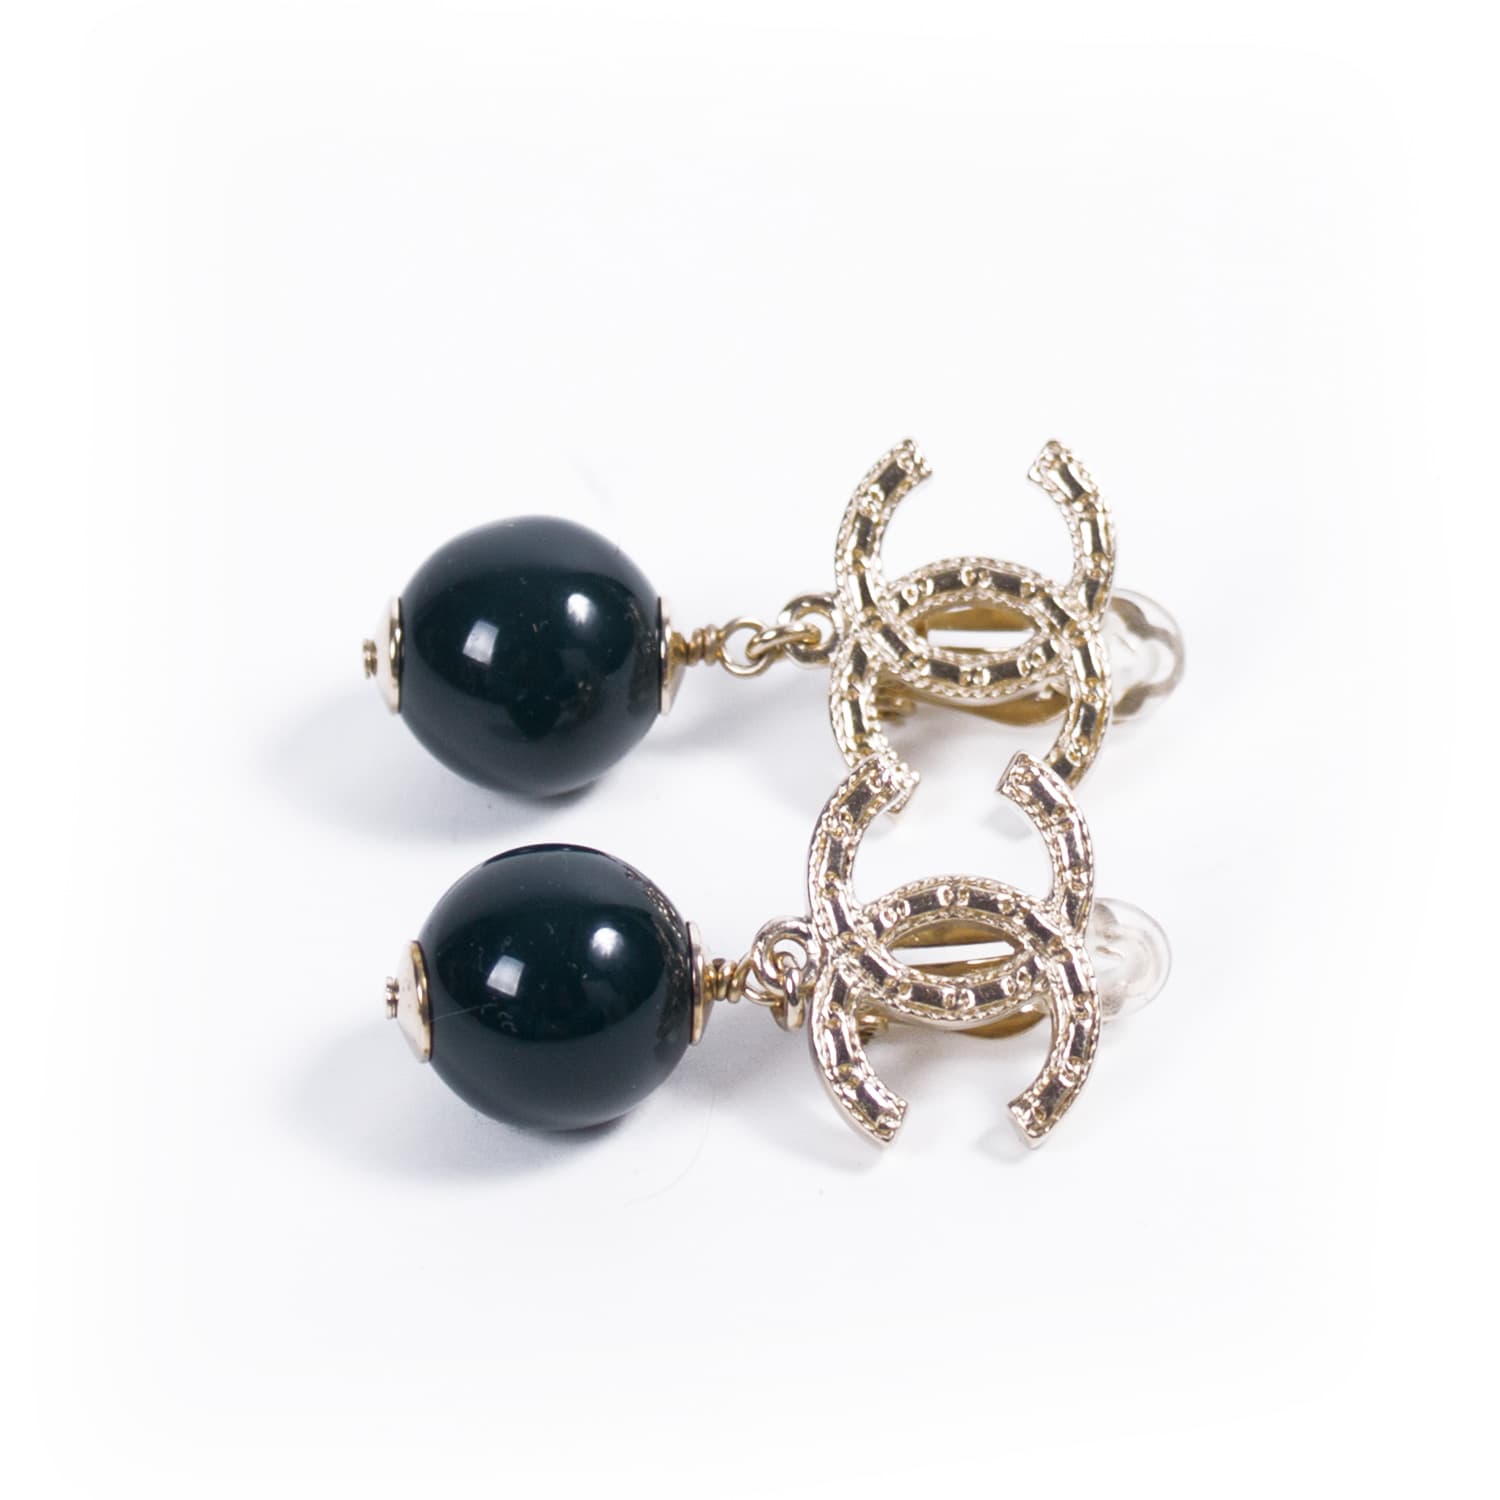 Shop authentic Chanel Pearl Drop-In Earrings at revogue for just USD 500.00